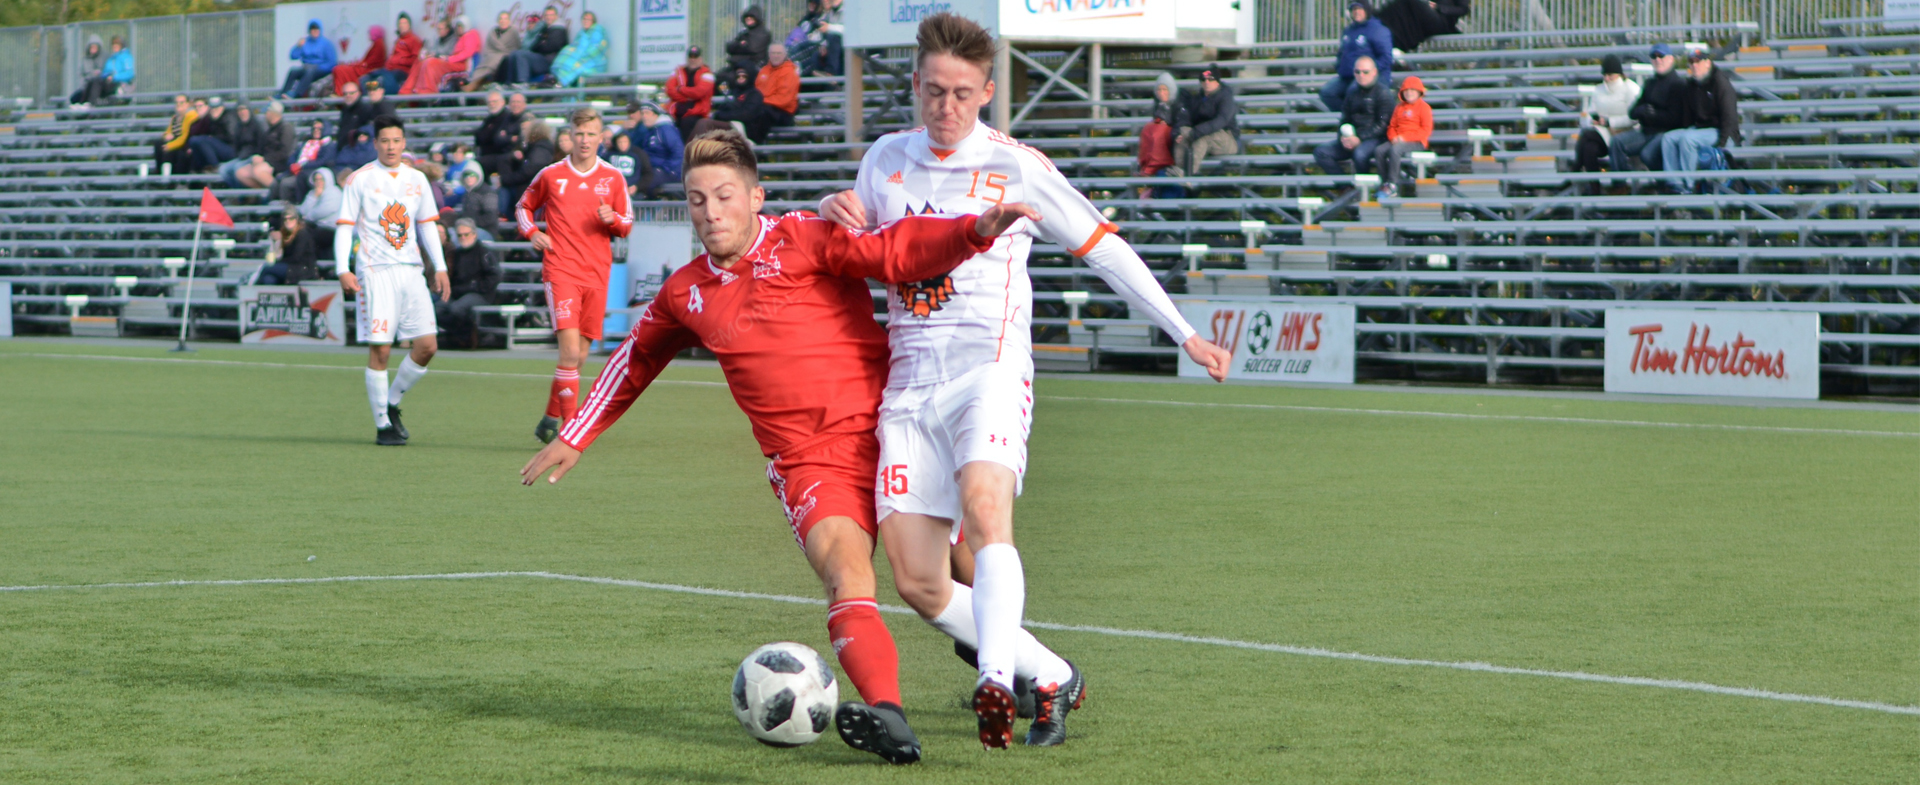 Sea-Hawks Battle to Draw With Capers